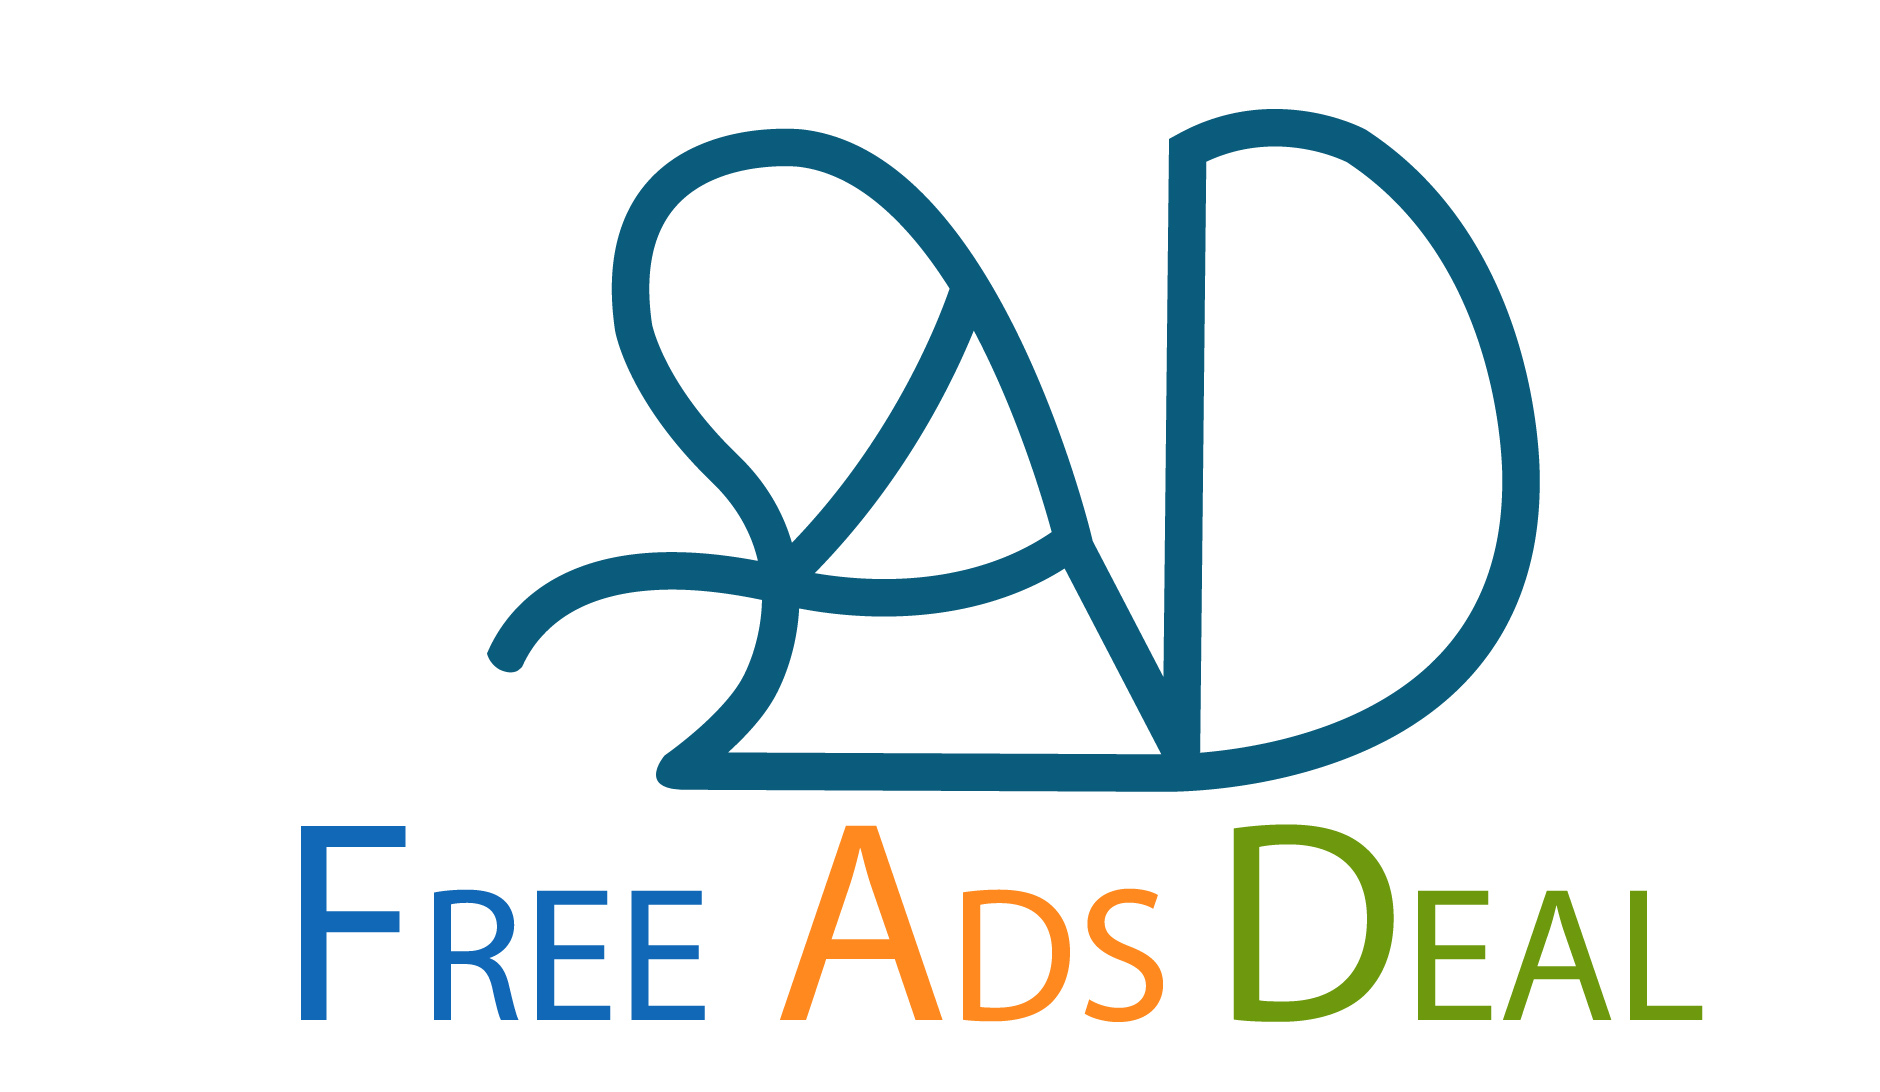 Post free classifieds ads for 180 days